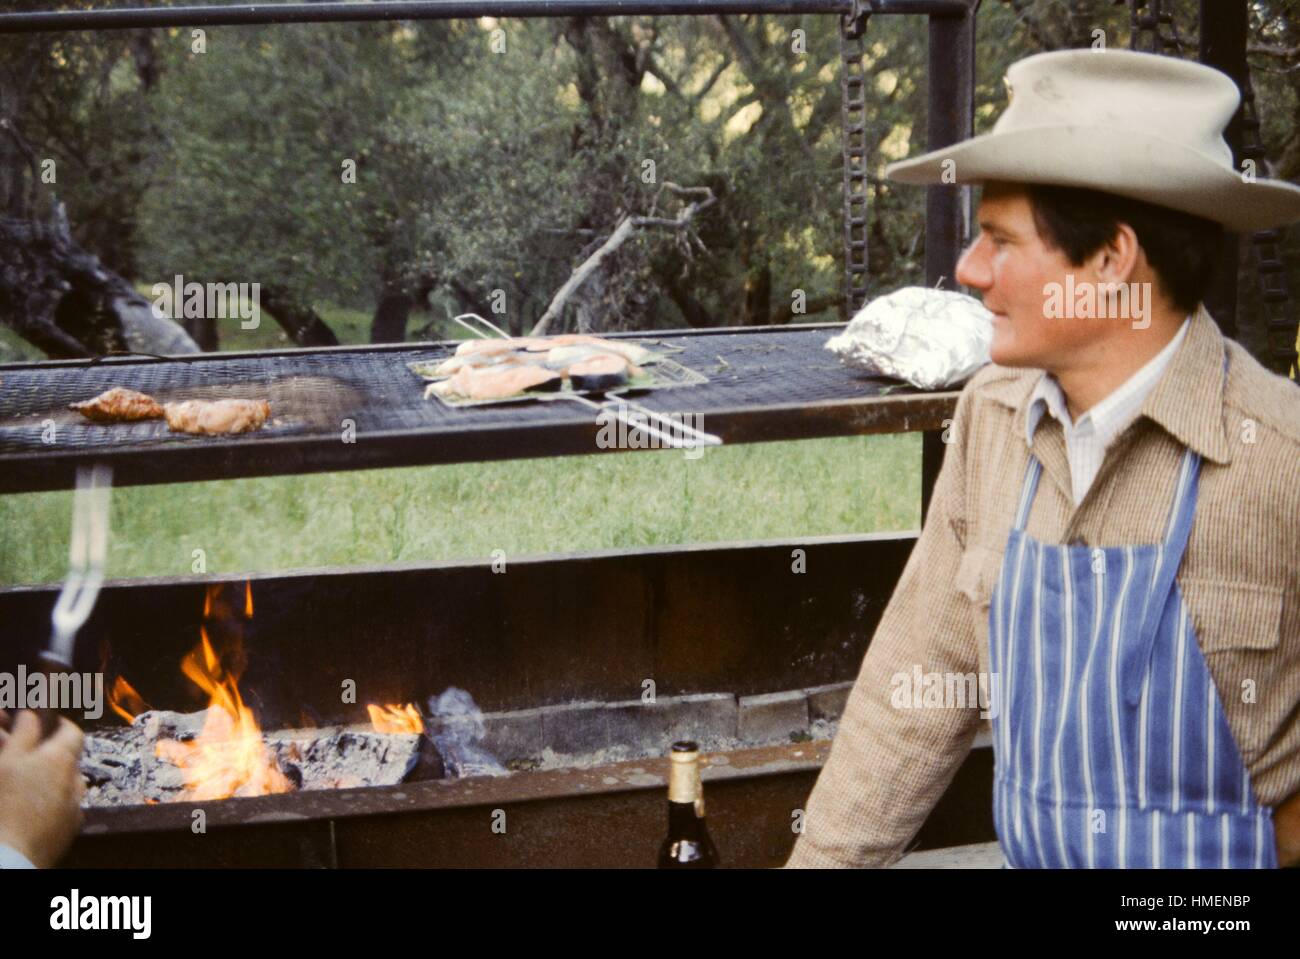 Man wearing a blue apron and cowboy hat grilling fish and meat over a large barbecue, 1975. Stock Photo